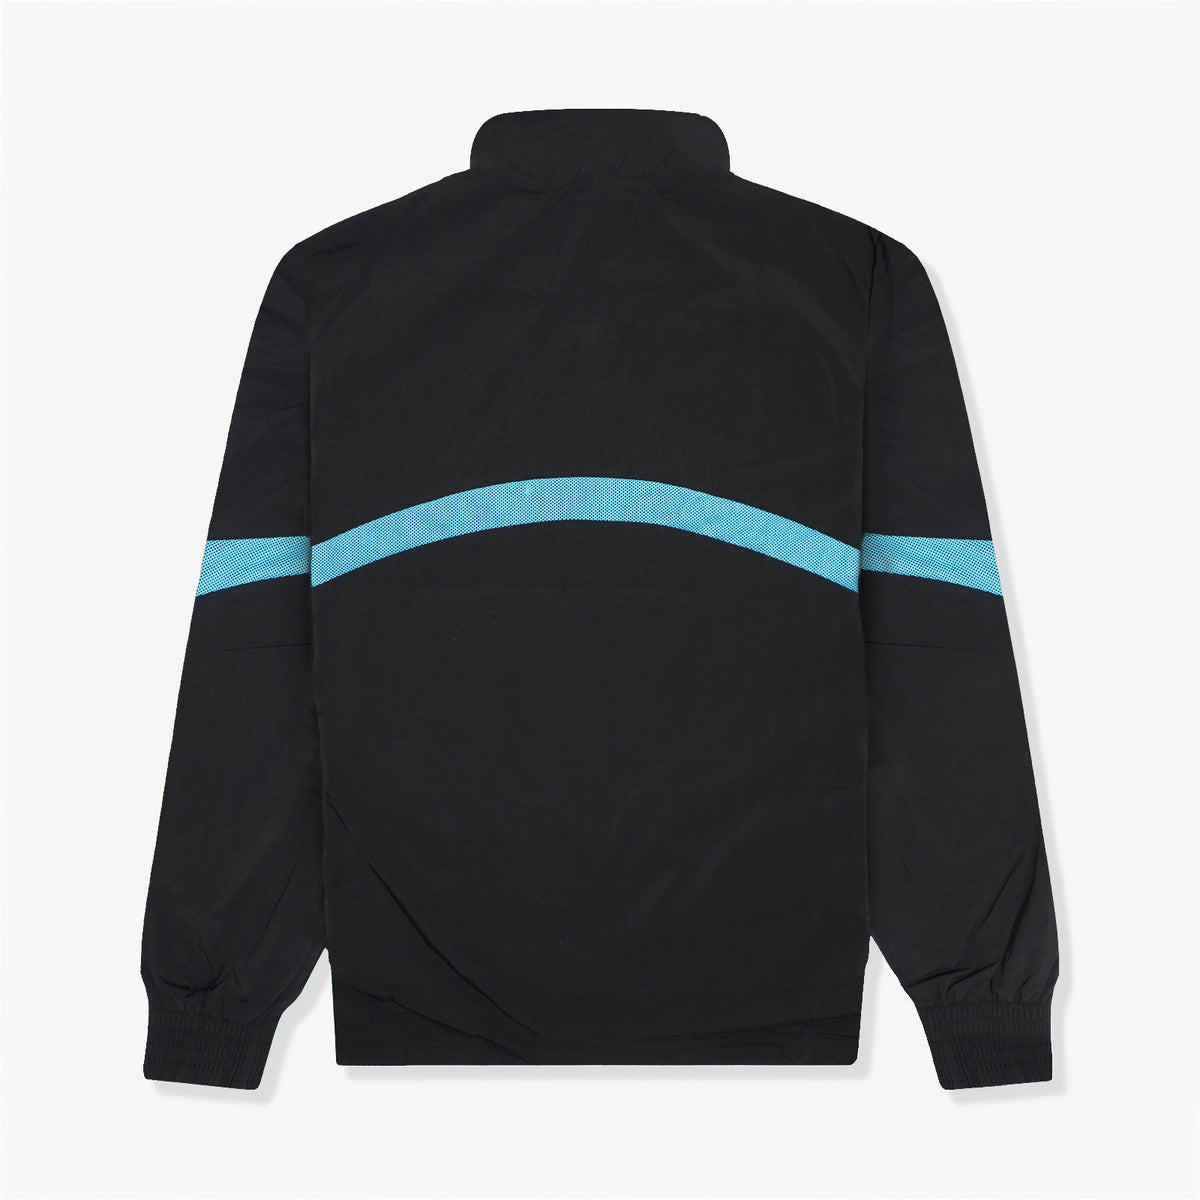 Melo Clyde Jacket - Black/Sunset Glow